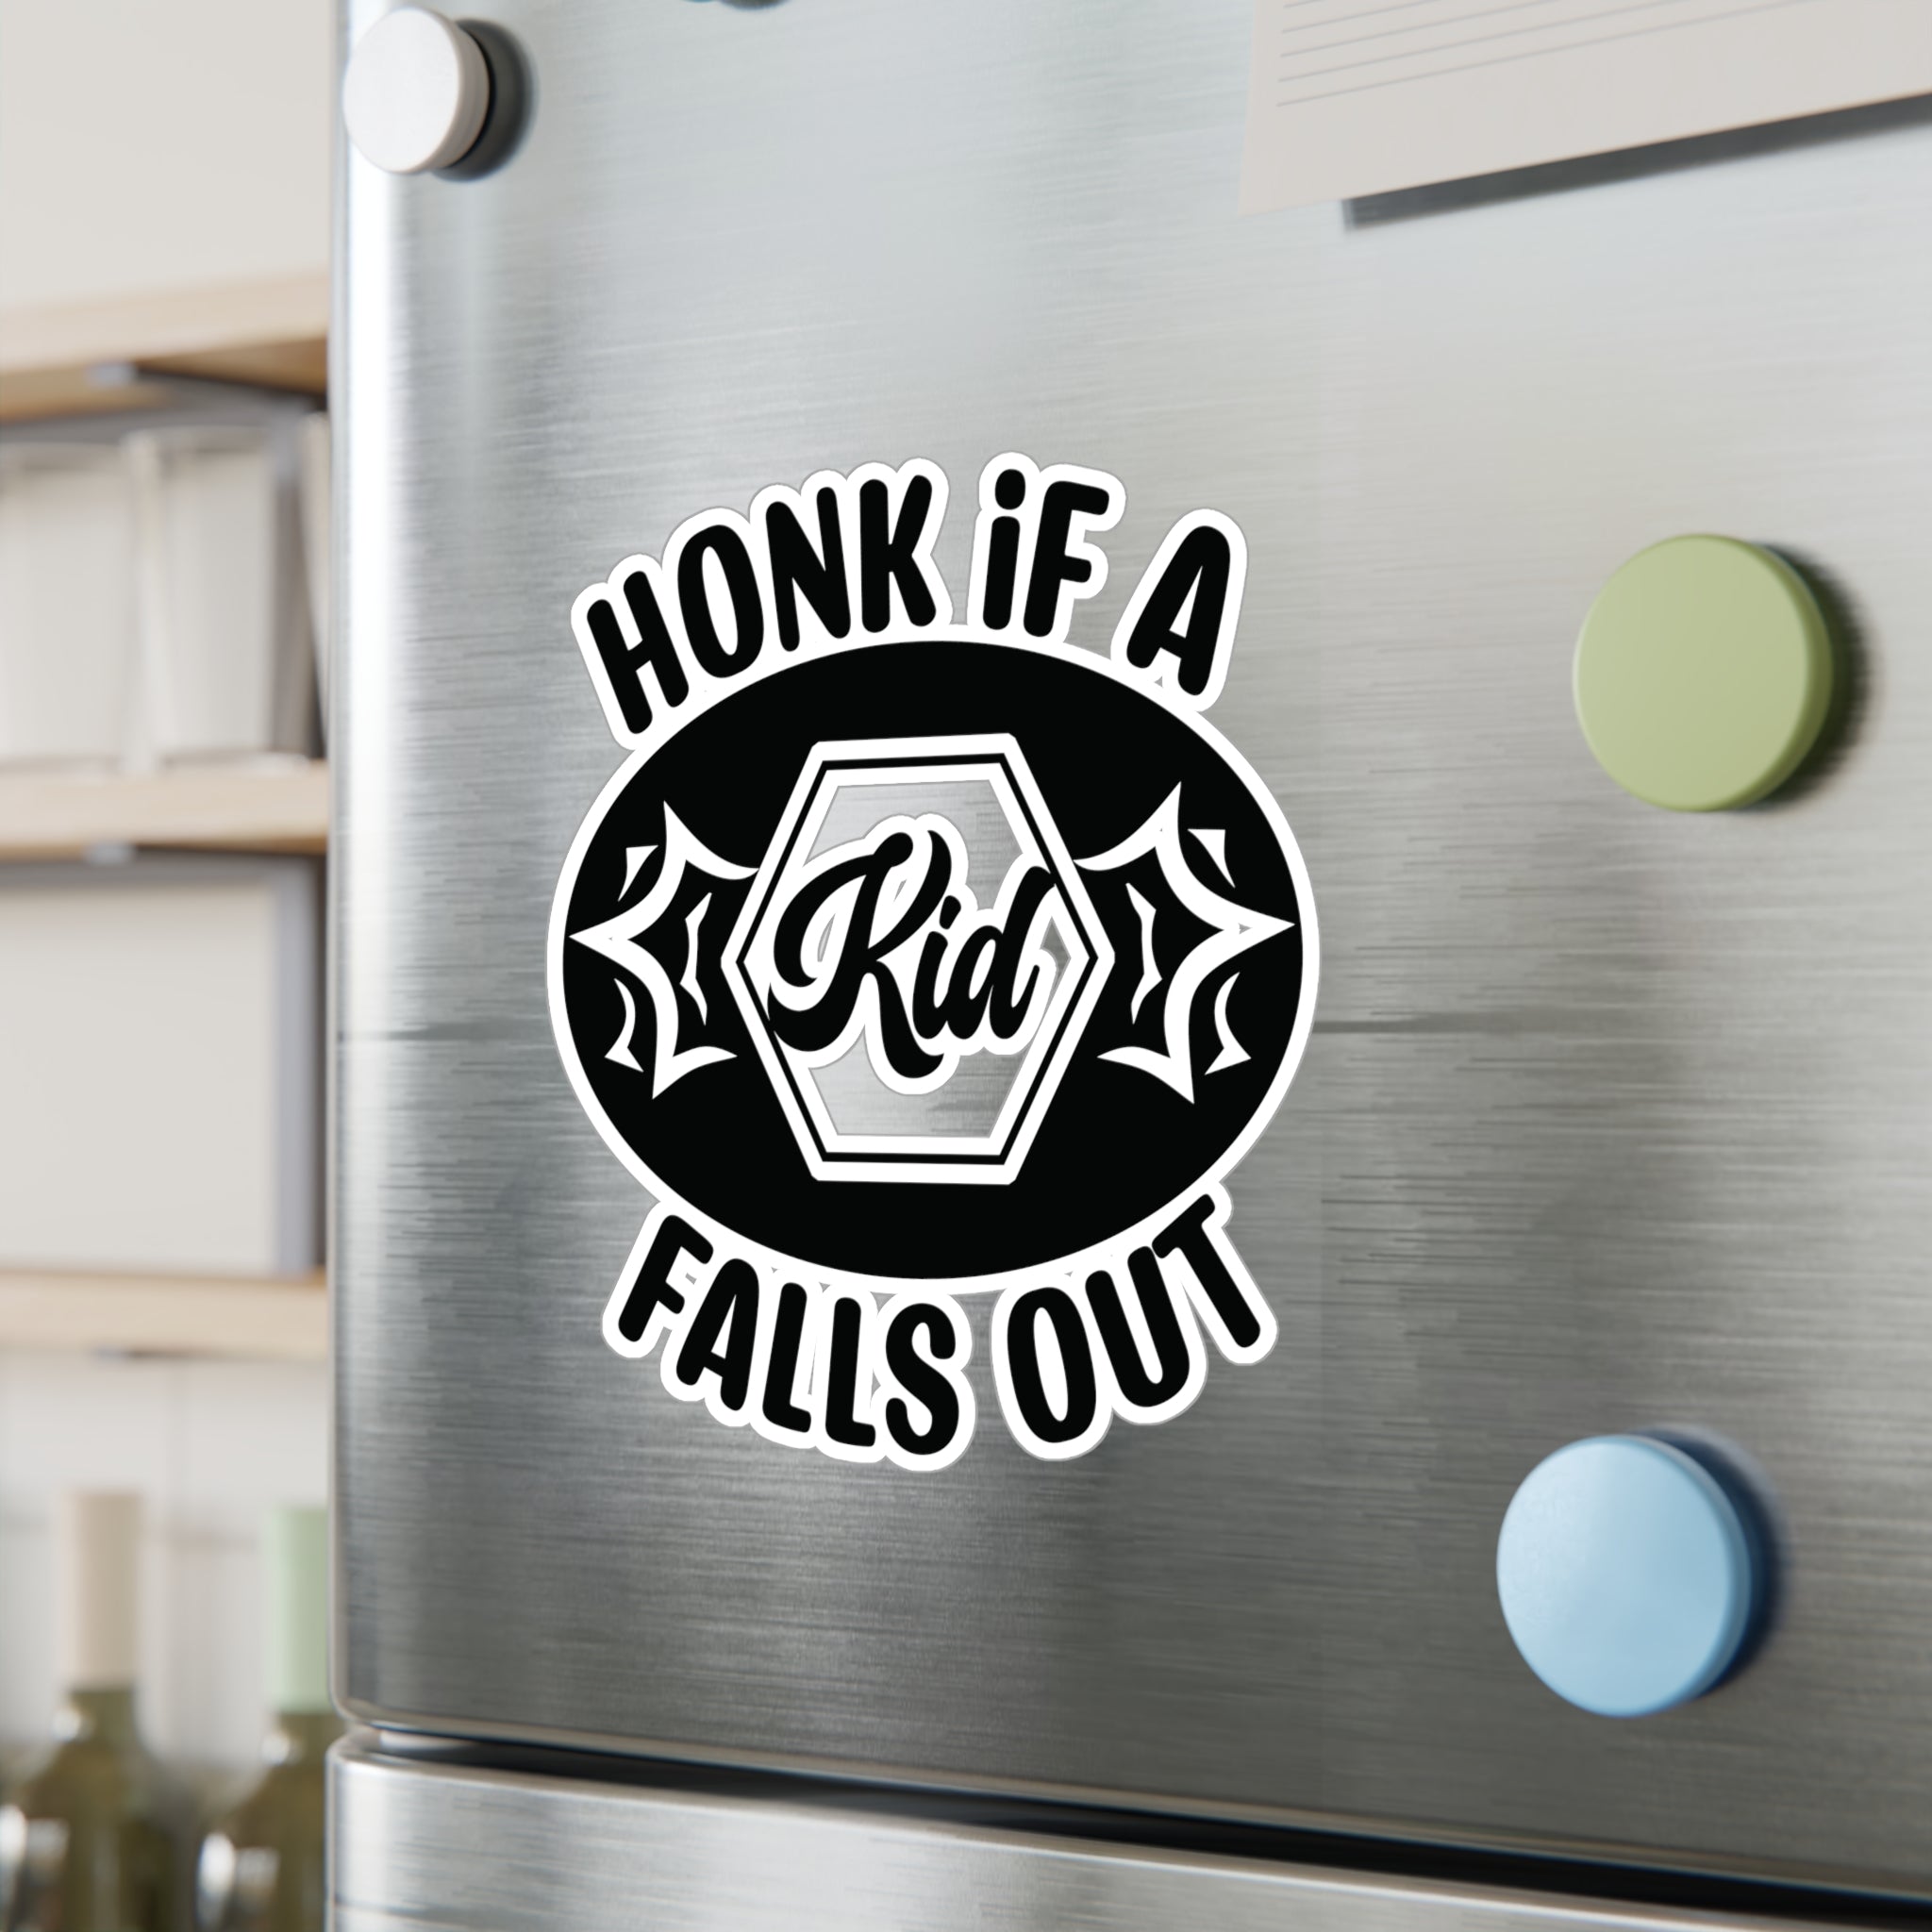 Honk If a Kid Falls Out Vinyl Car Sticker Decal Sticker Christmas Gift